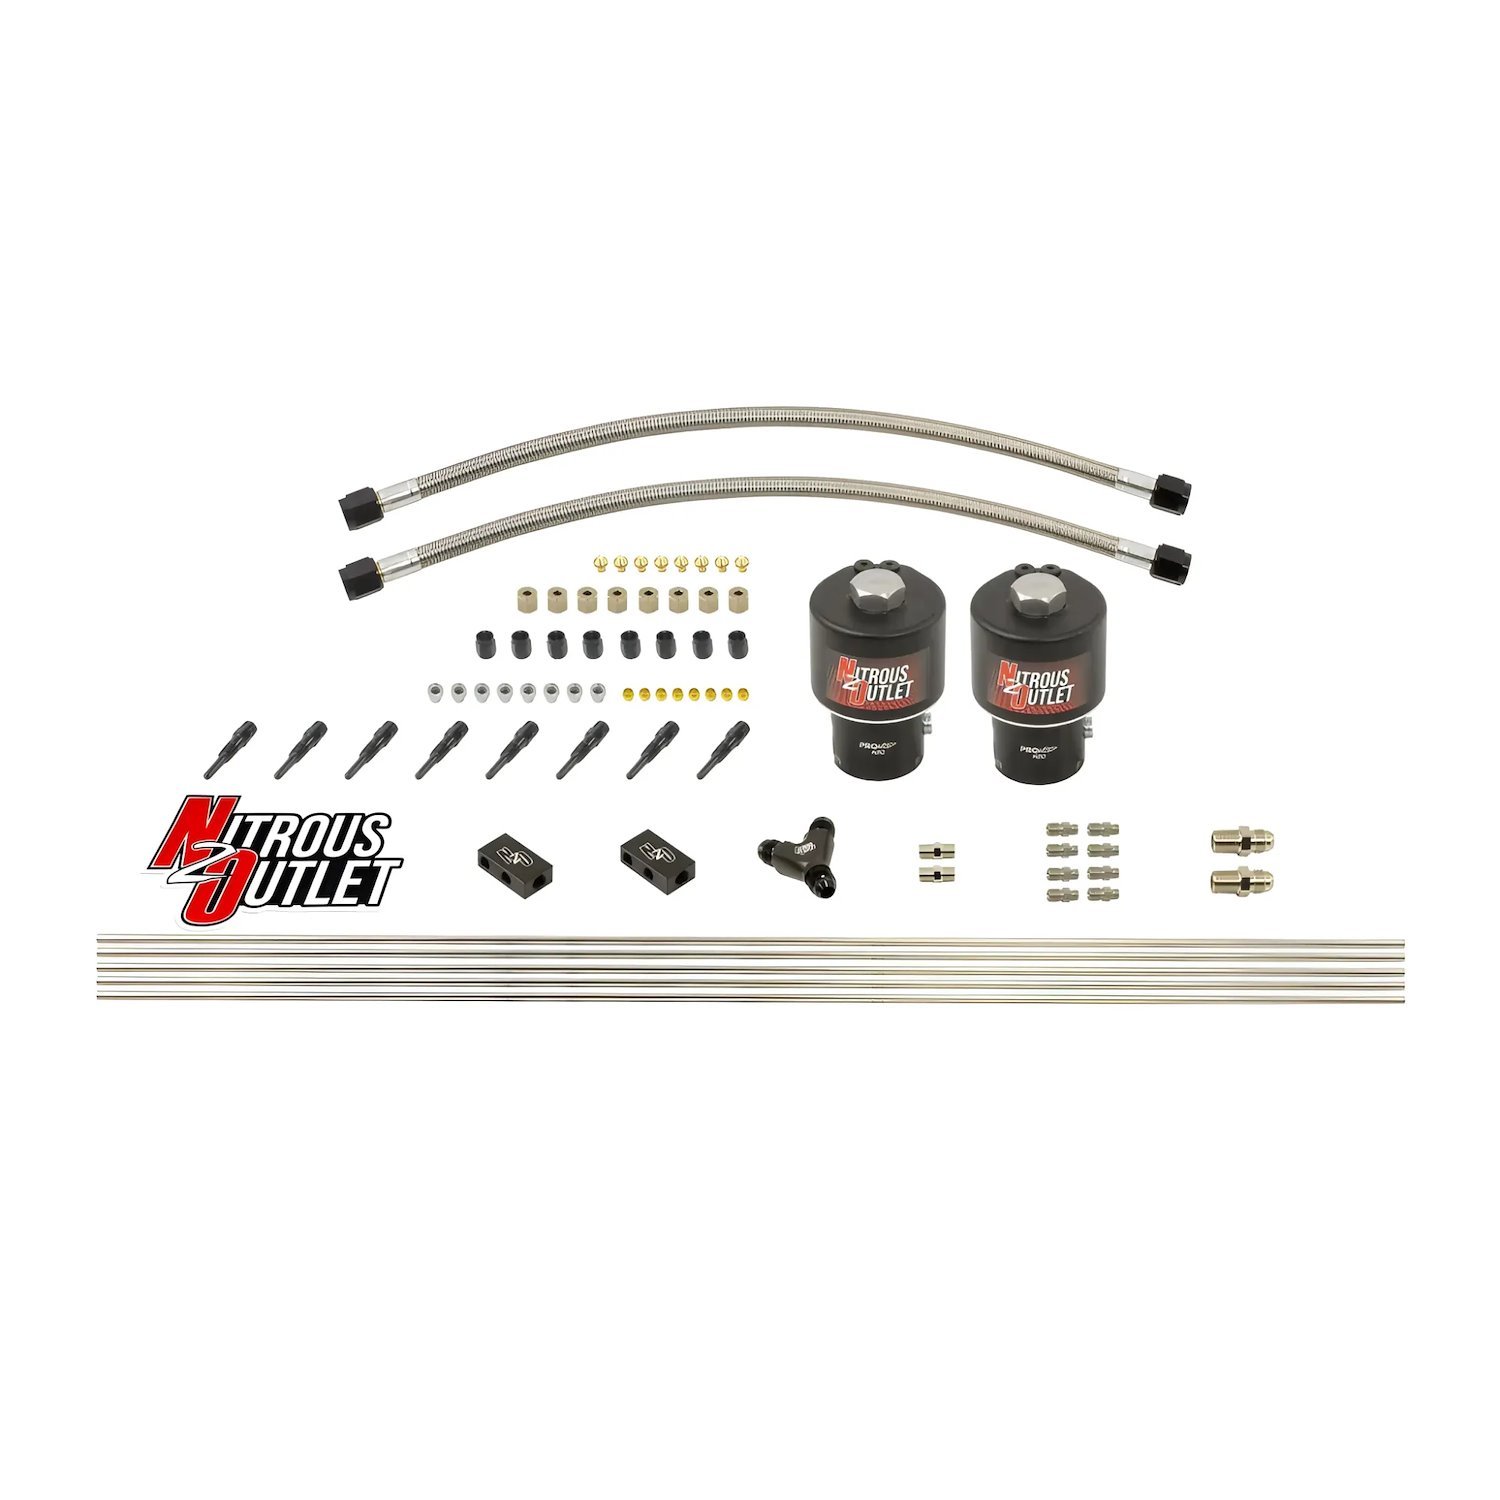 00-10420-T Dry 8-Cyl Solenoid Forward Direct Port Conversion Kit, Two .178 Trashcan Nitrous Solenoids